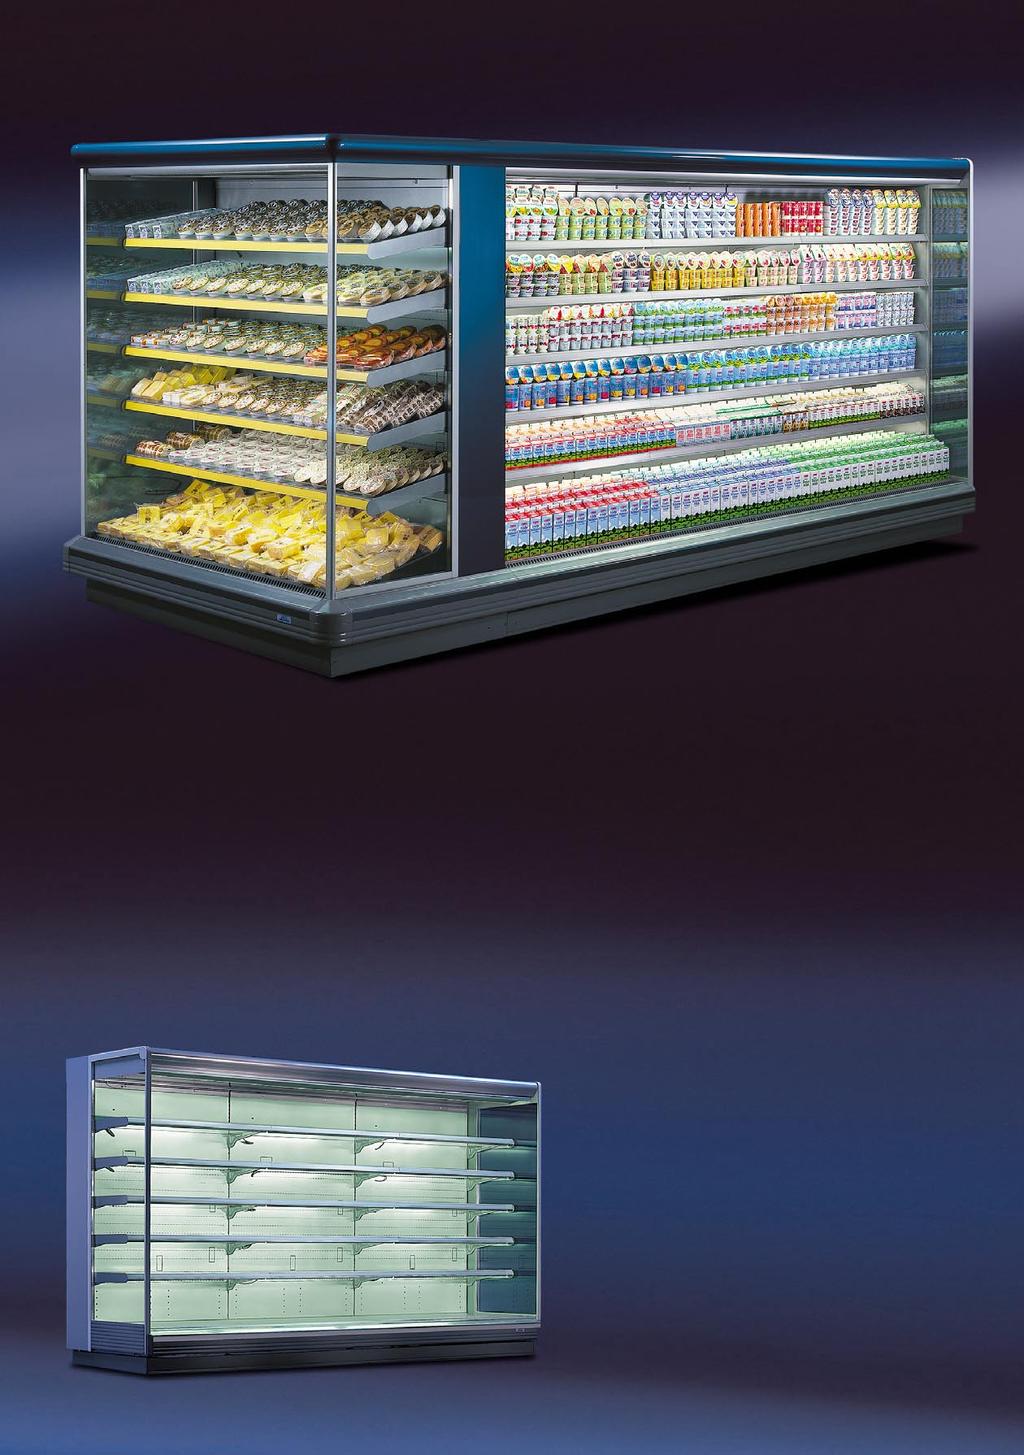 With refrigerated display cases from Linde you win every time: They offer flexibility in interior fittings for perfect matching to all product selections.